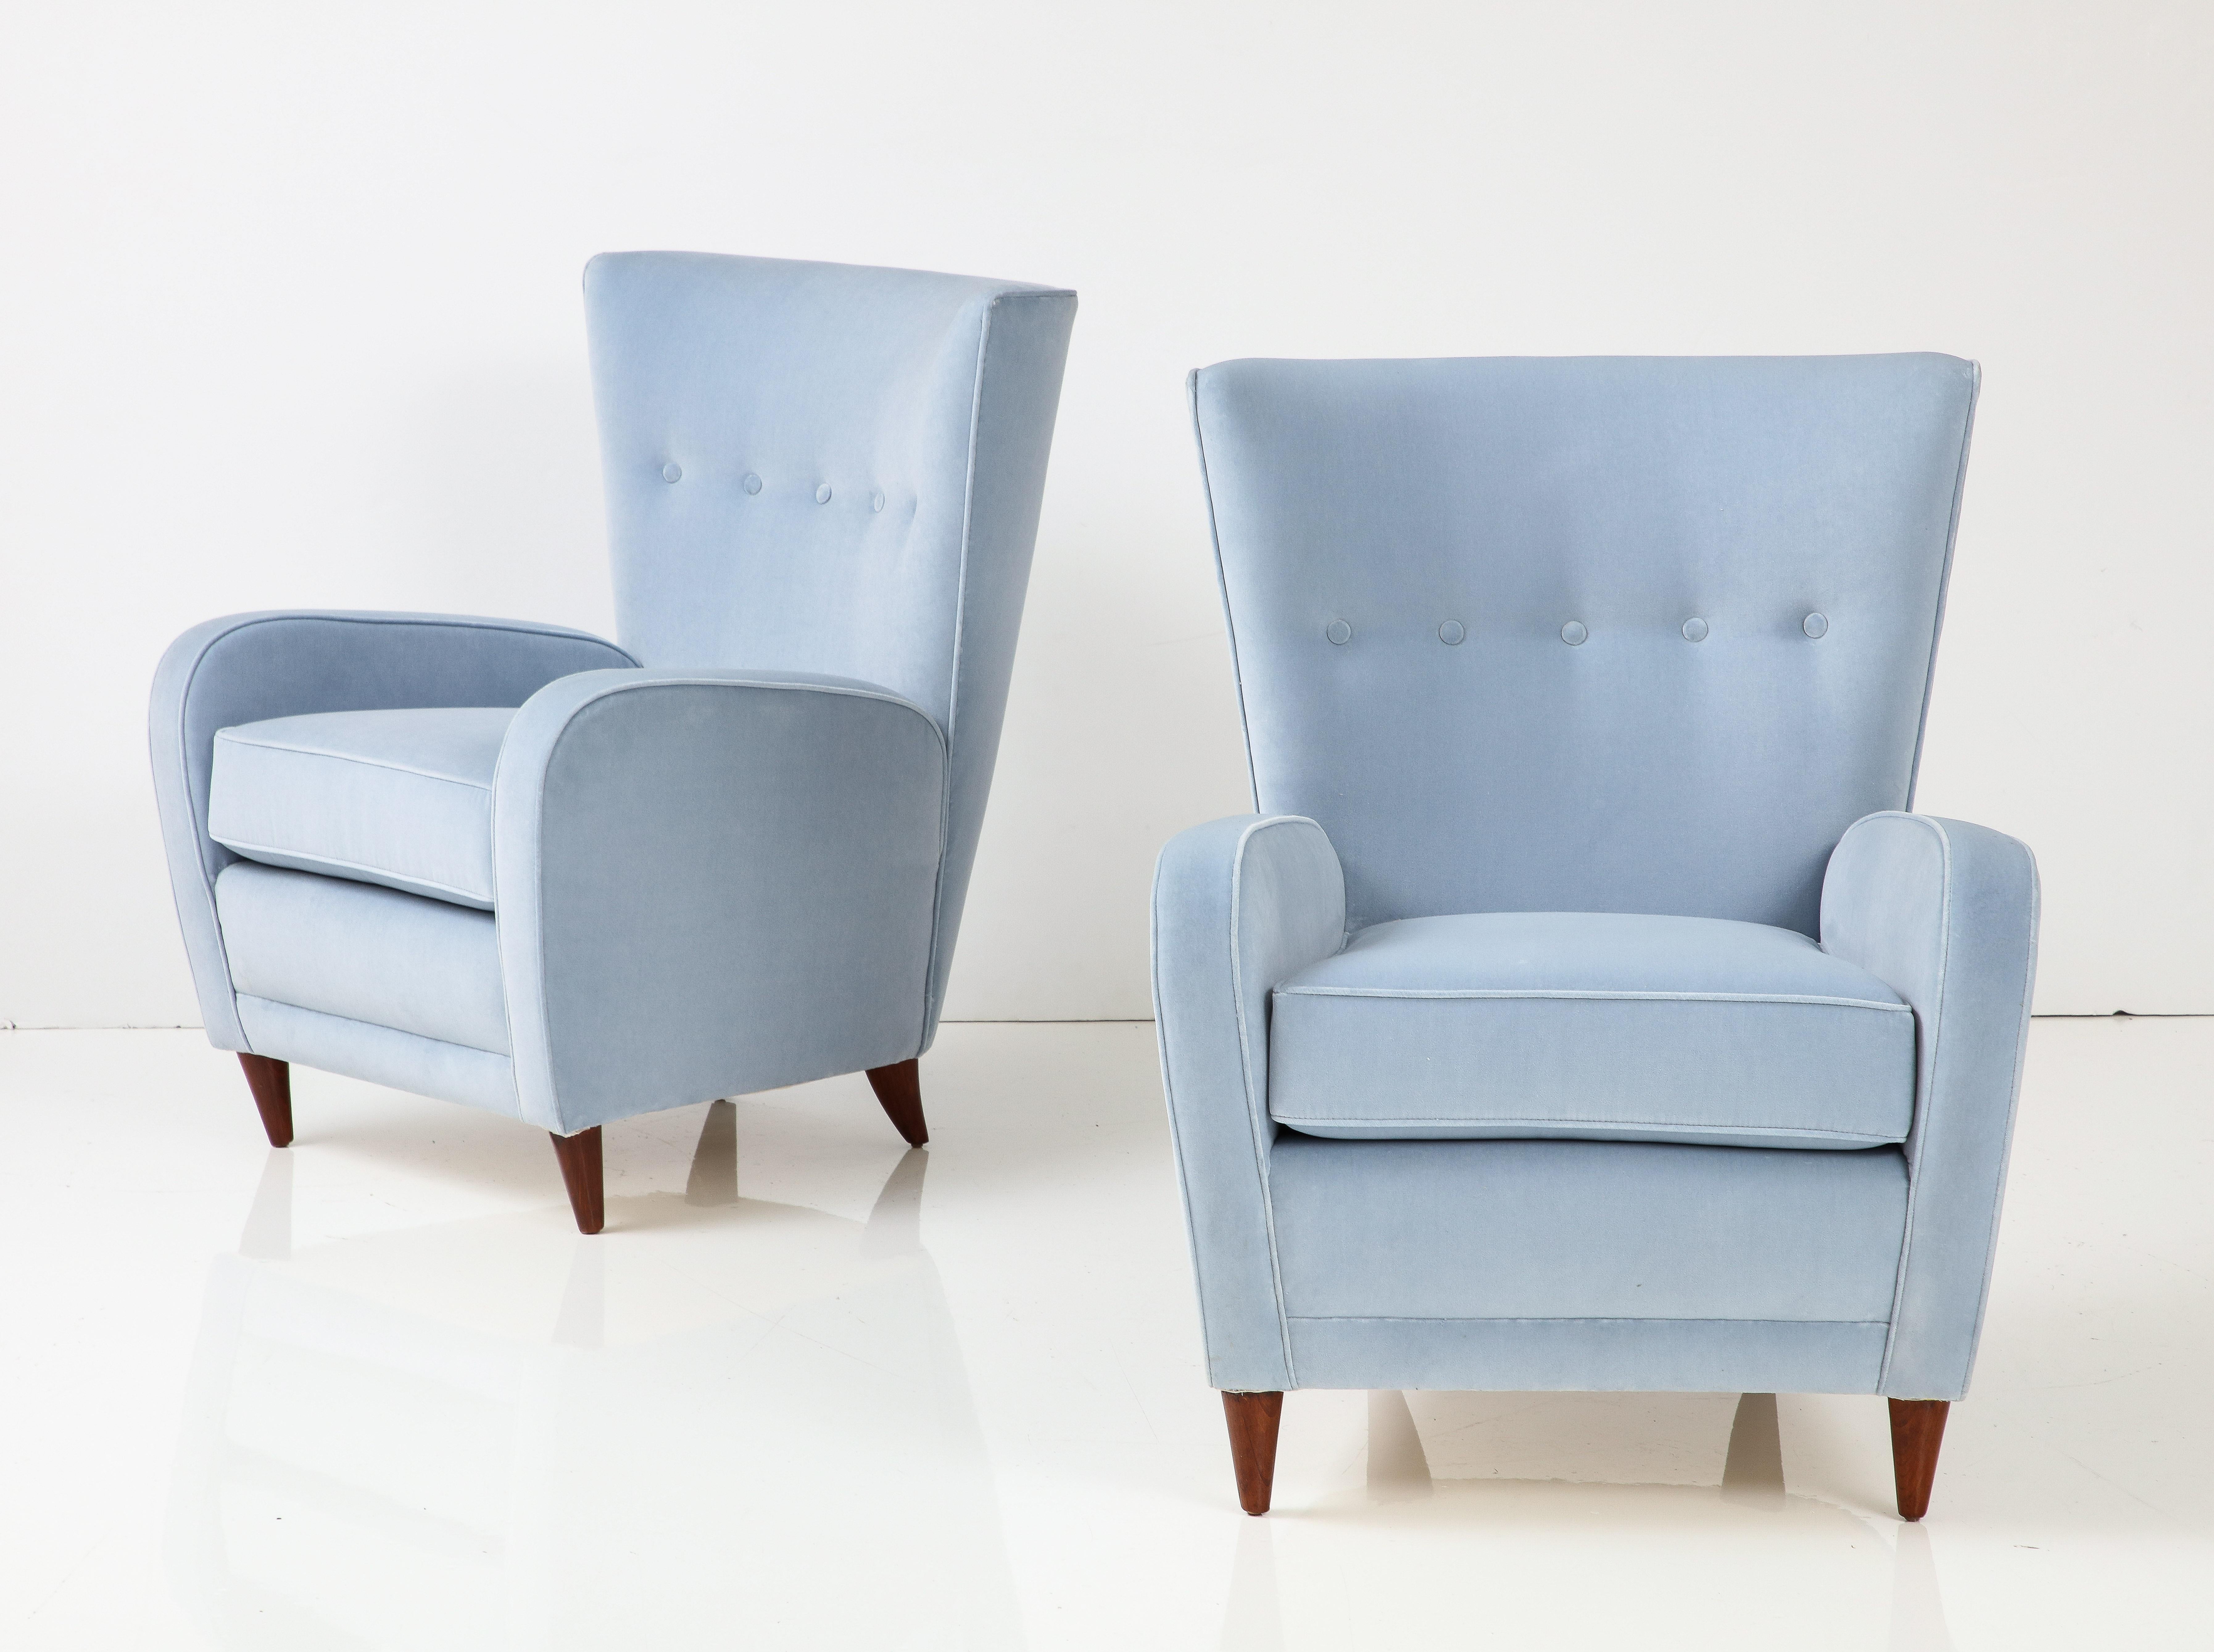 Paolo Buffa pair of lounge chairs or armchairs with curved wingback and back buttons, cushion seat, rounded armrests and elegantly tapered legs, Italy, 1950s. These incredibly chic lounge chairs or modernist wingback chairs have been fully restored